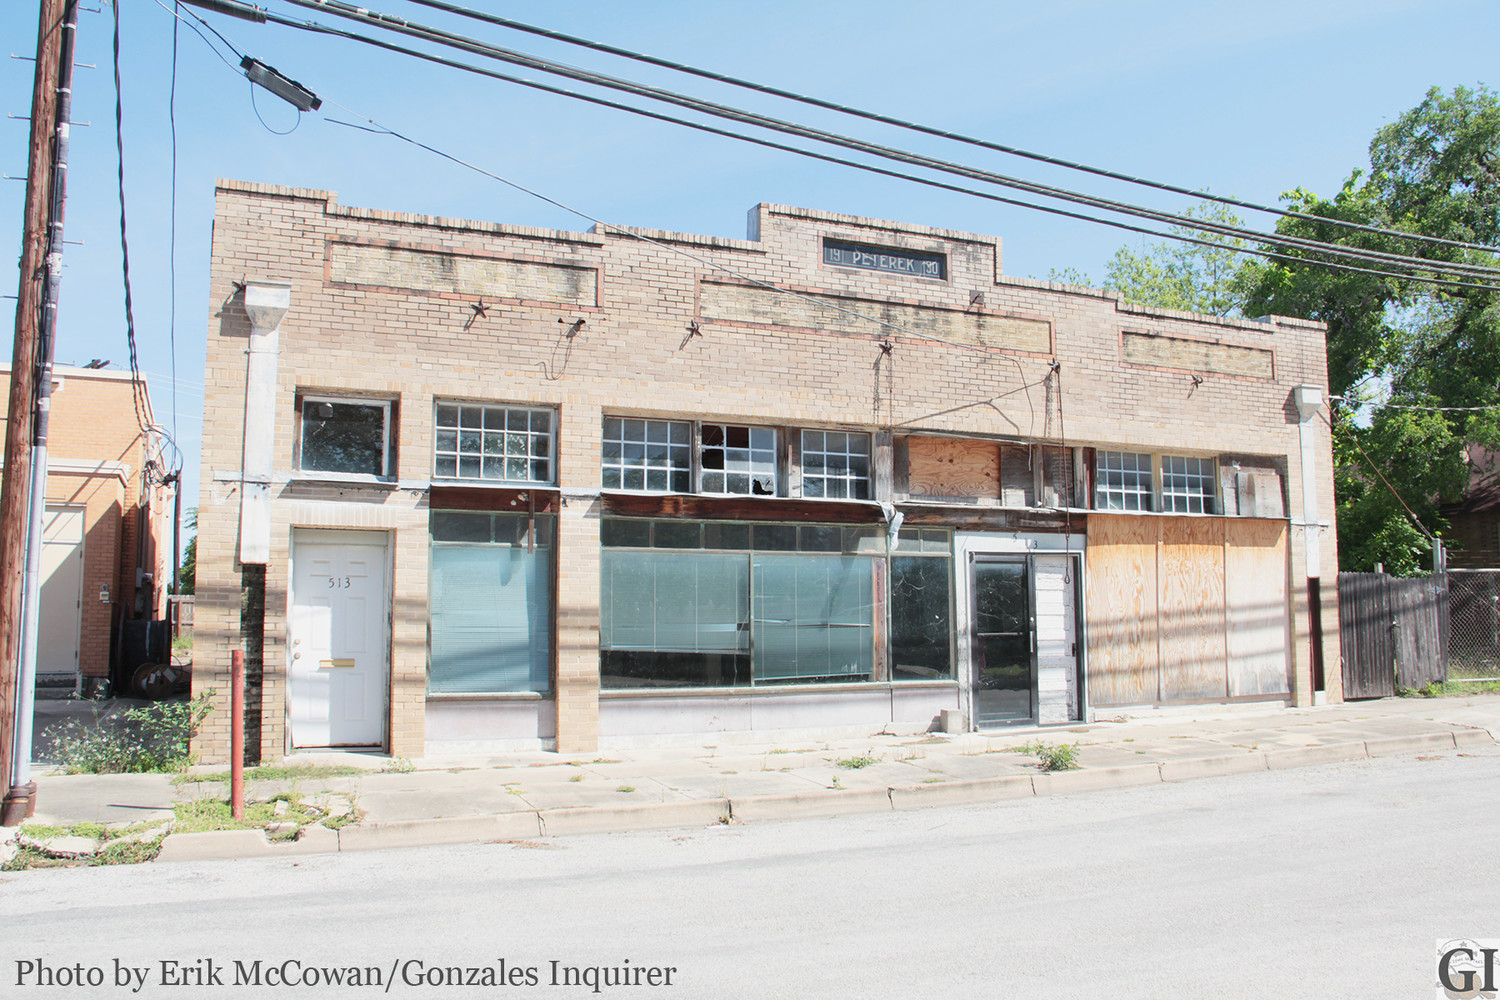 The building at 513 St. George St. was originally intended as a small business incubator to be run by the Gonzales Economic Development Corporation. The idea has since been abandoned and the property has been offered to the highest bidder.